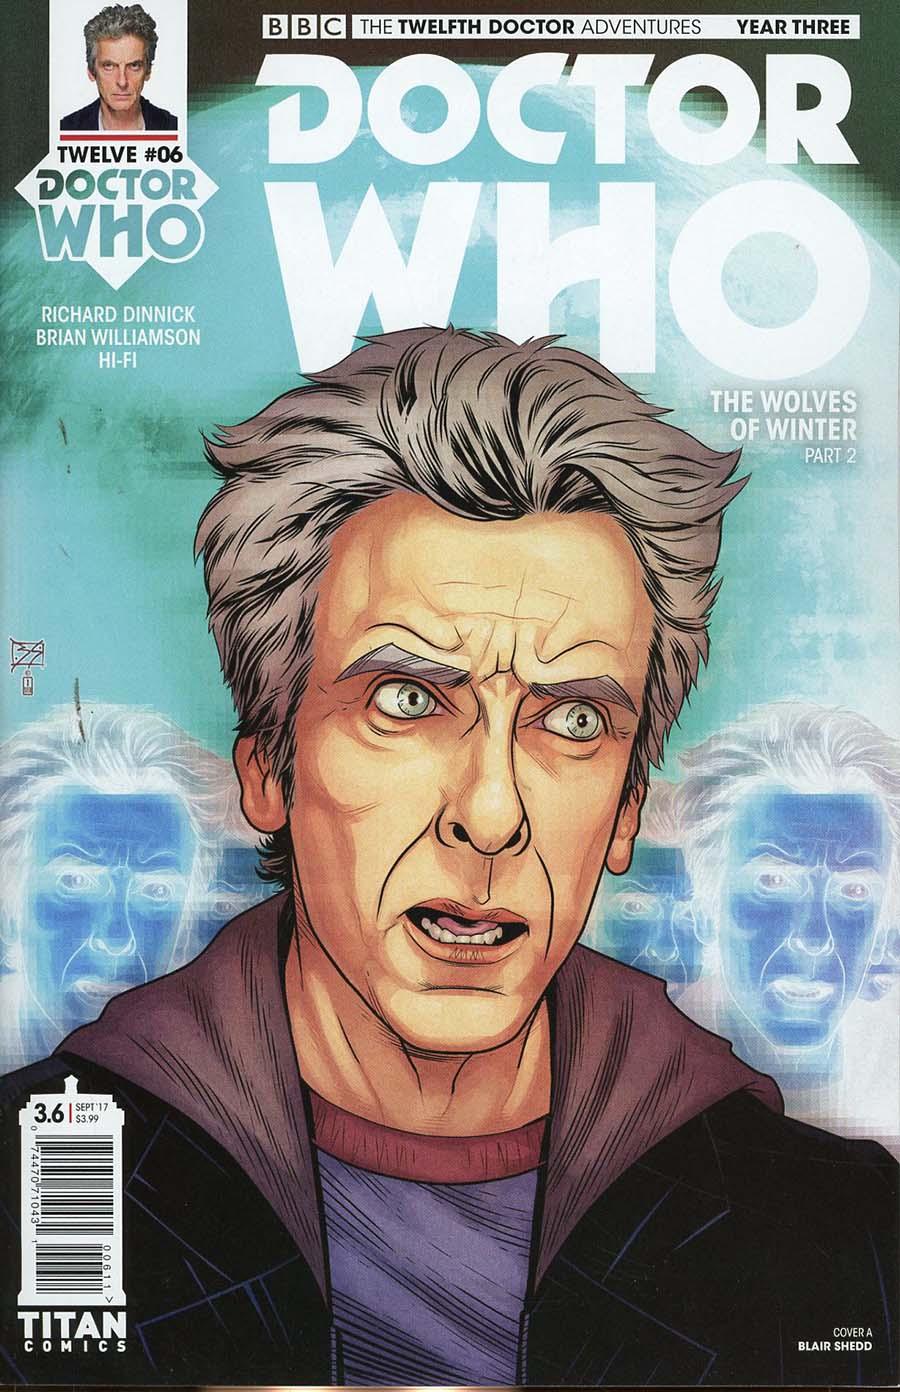 Doctor Who 12th Doctor Year Three Vol. 1 #6